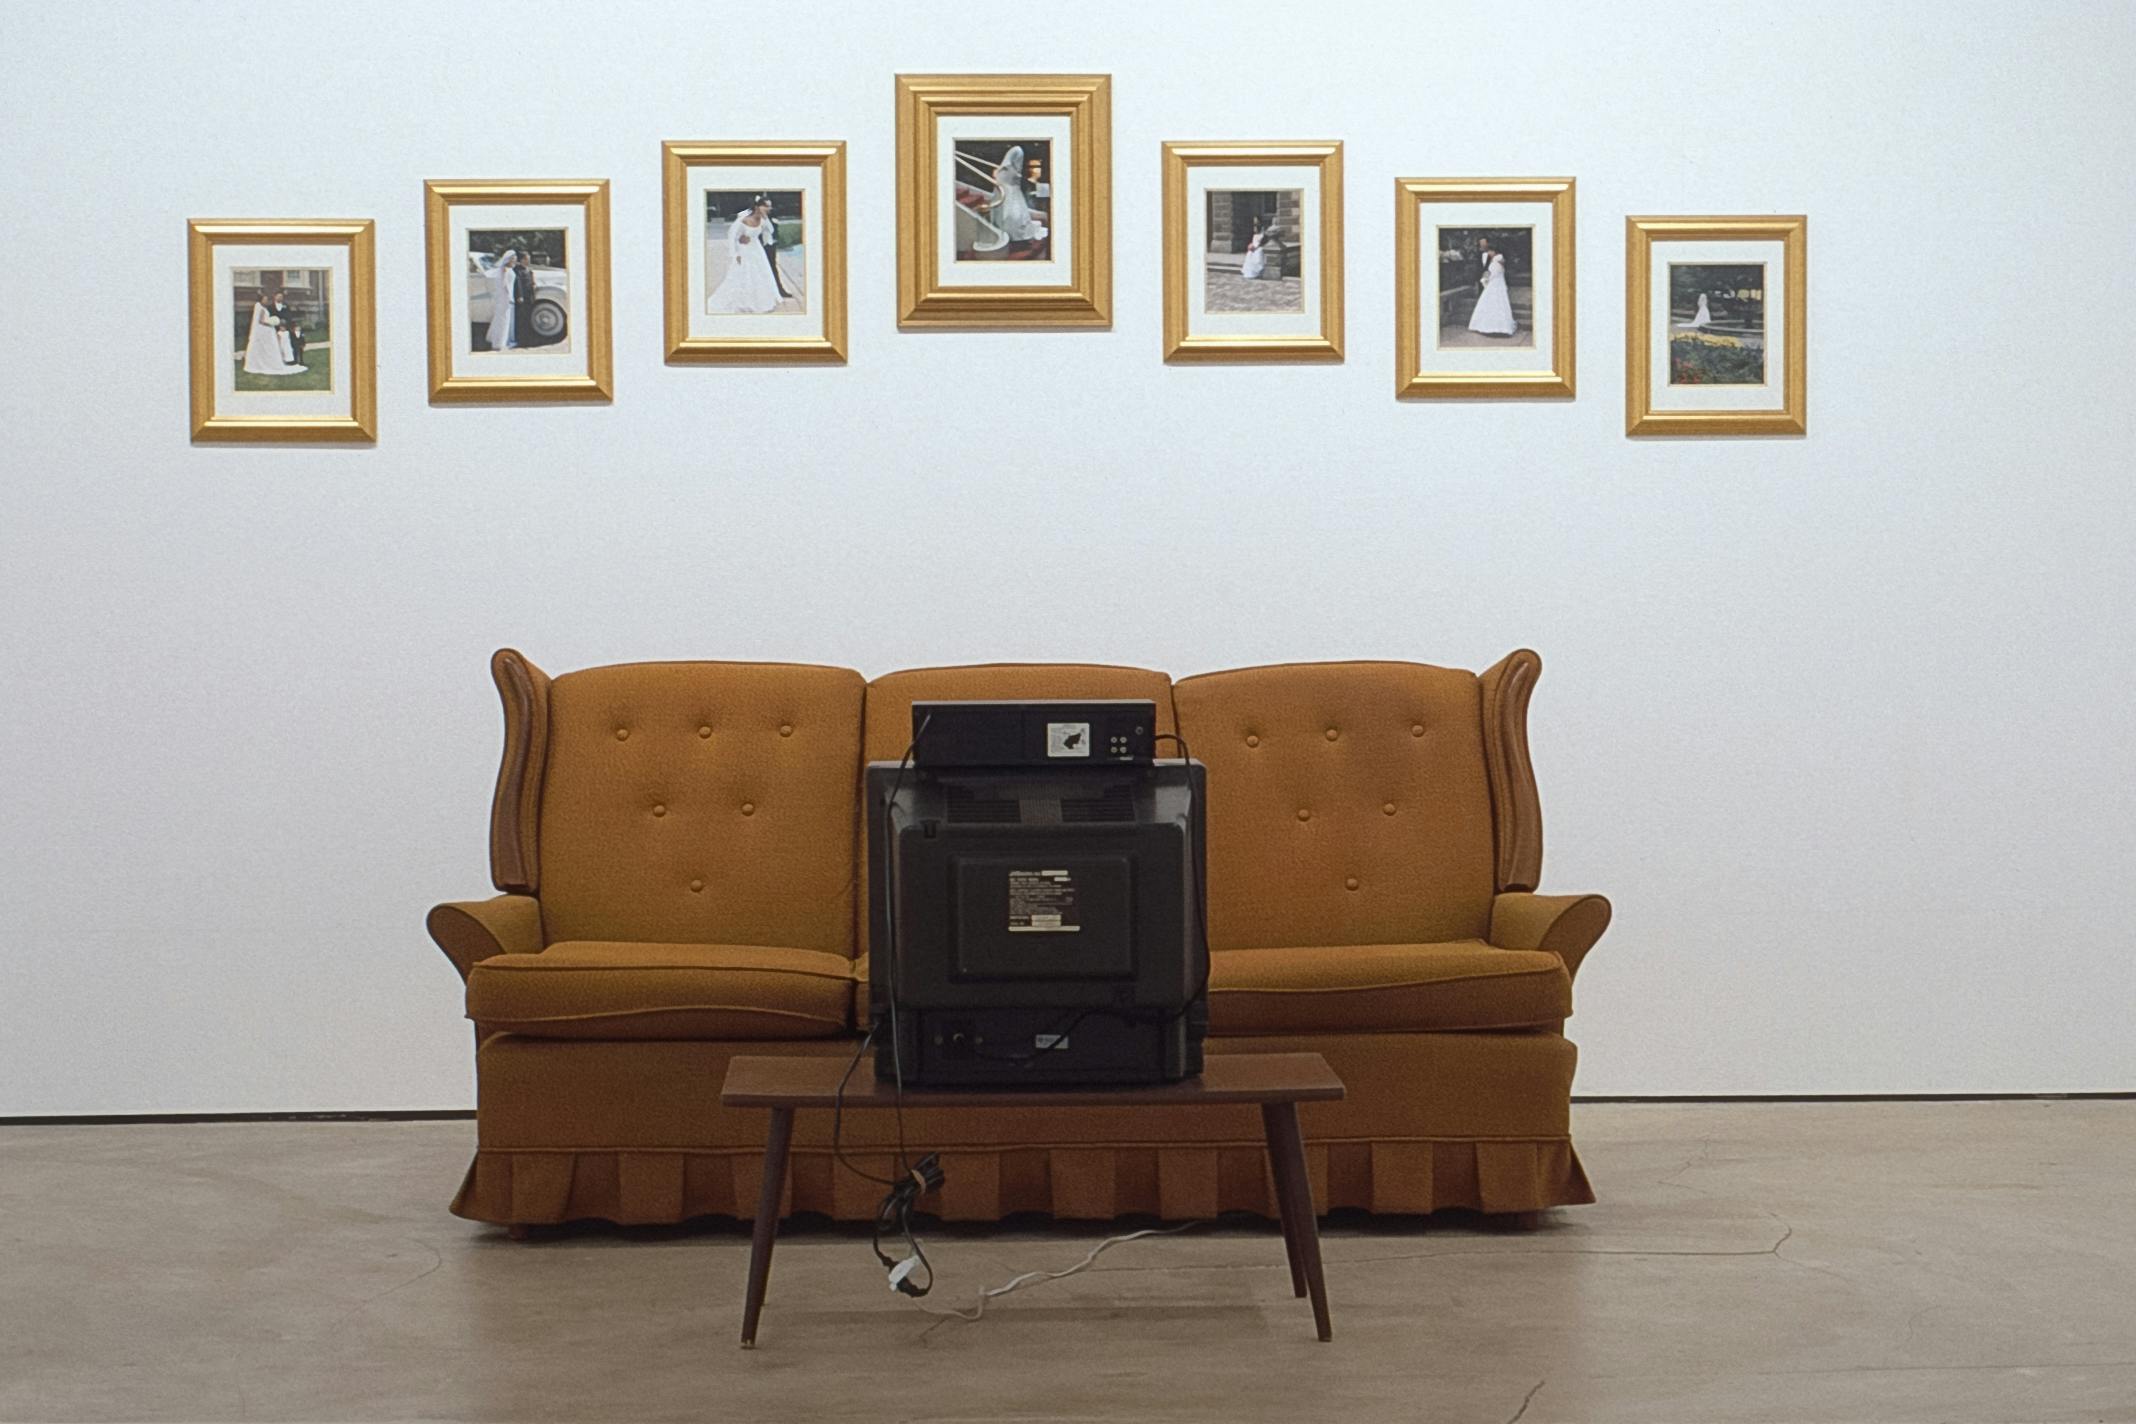 Seven wedding photographs are installed on the gallery wall above the mustard-coloured couch. A black CRT TV is placed in front of the couch. All photographs are gold framed. 